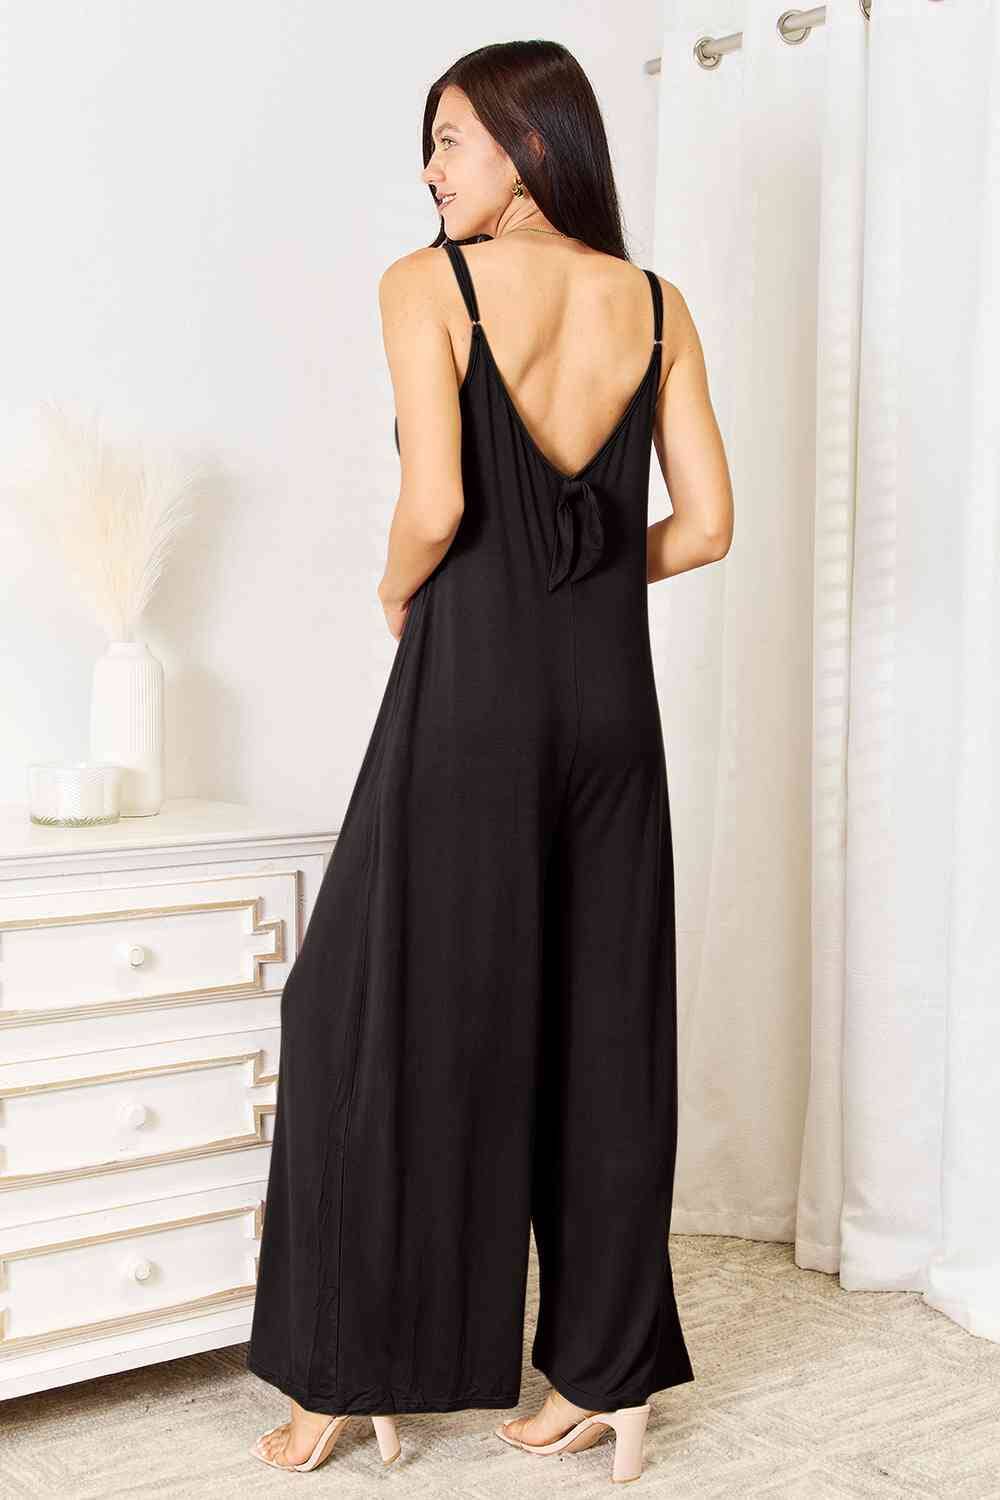 Double Take Soft Rayon Spaghetti Strap Tied Wide Leg Jumpsuit Jumpsuits & Rompers jehouze 